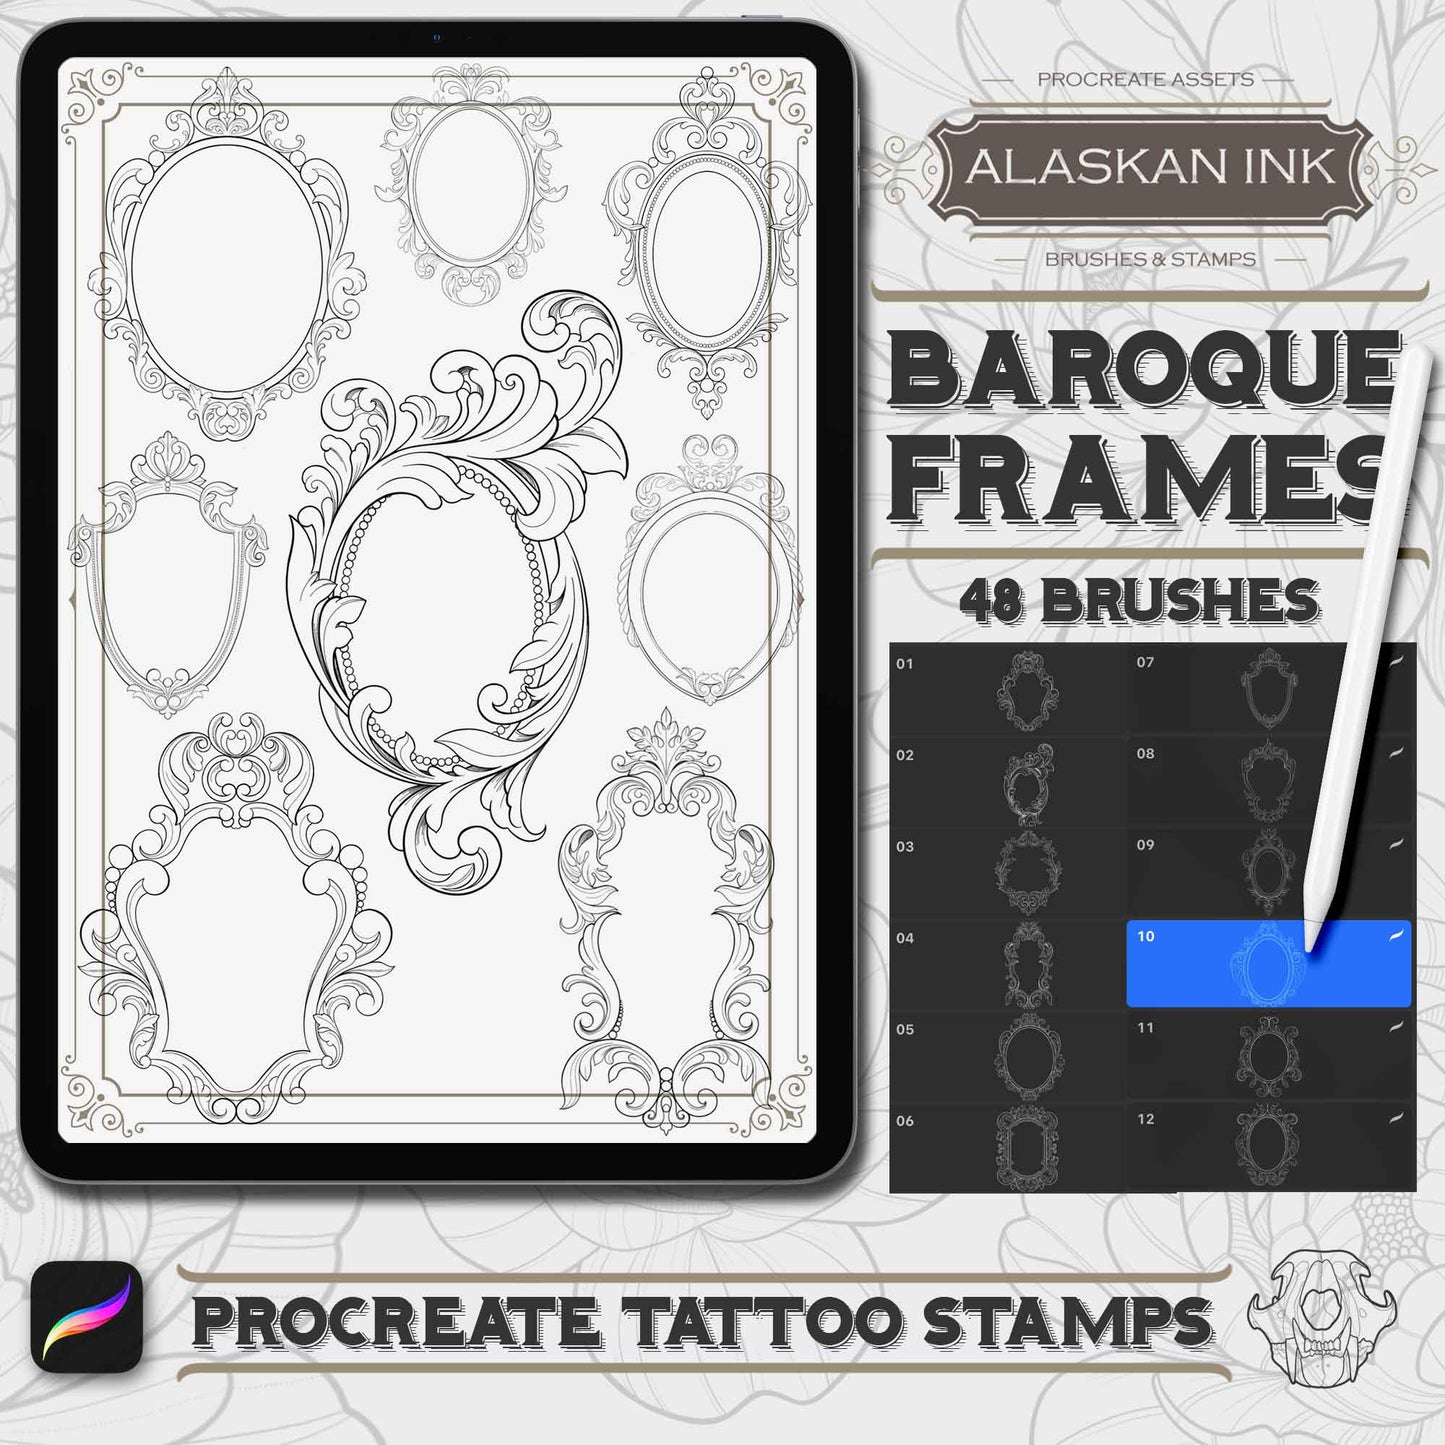 48 Baroque Frames Procreate tattoo brushes for iPAd and iPad pro by Alaskan Ink Studio